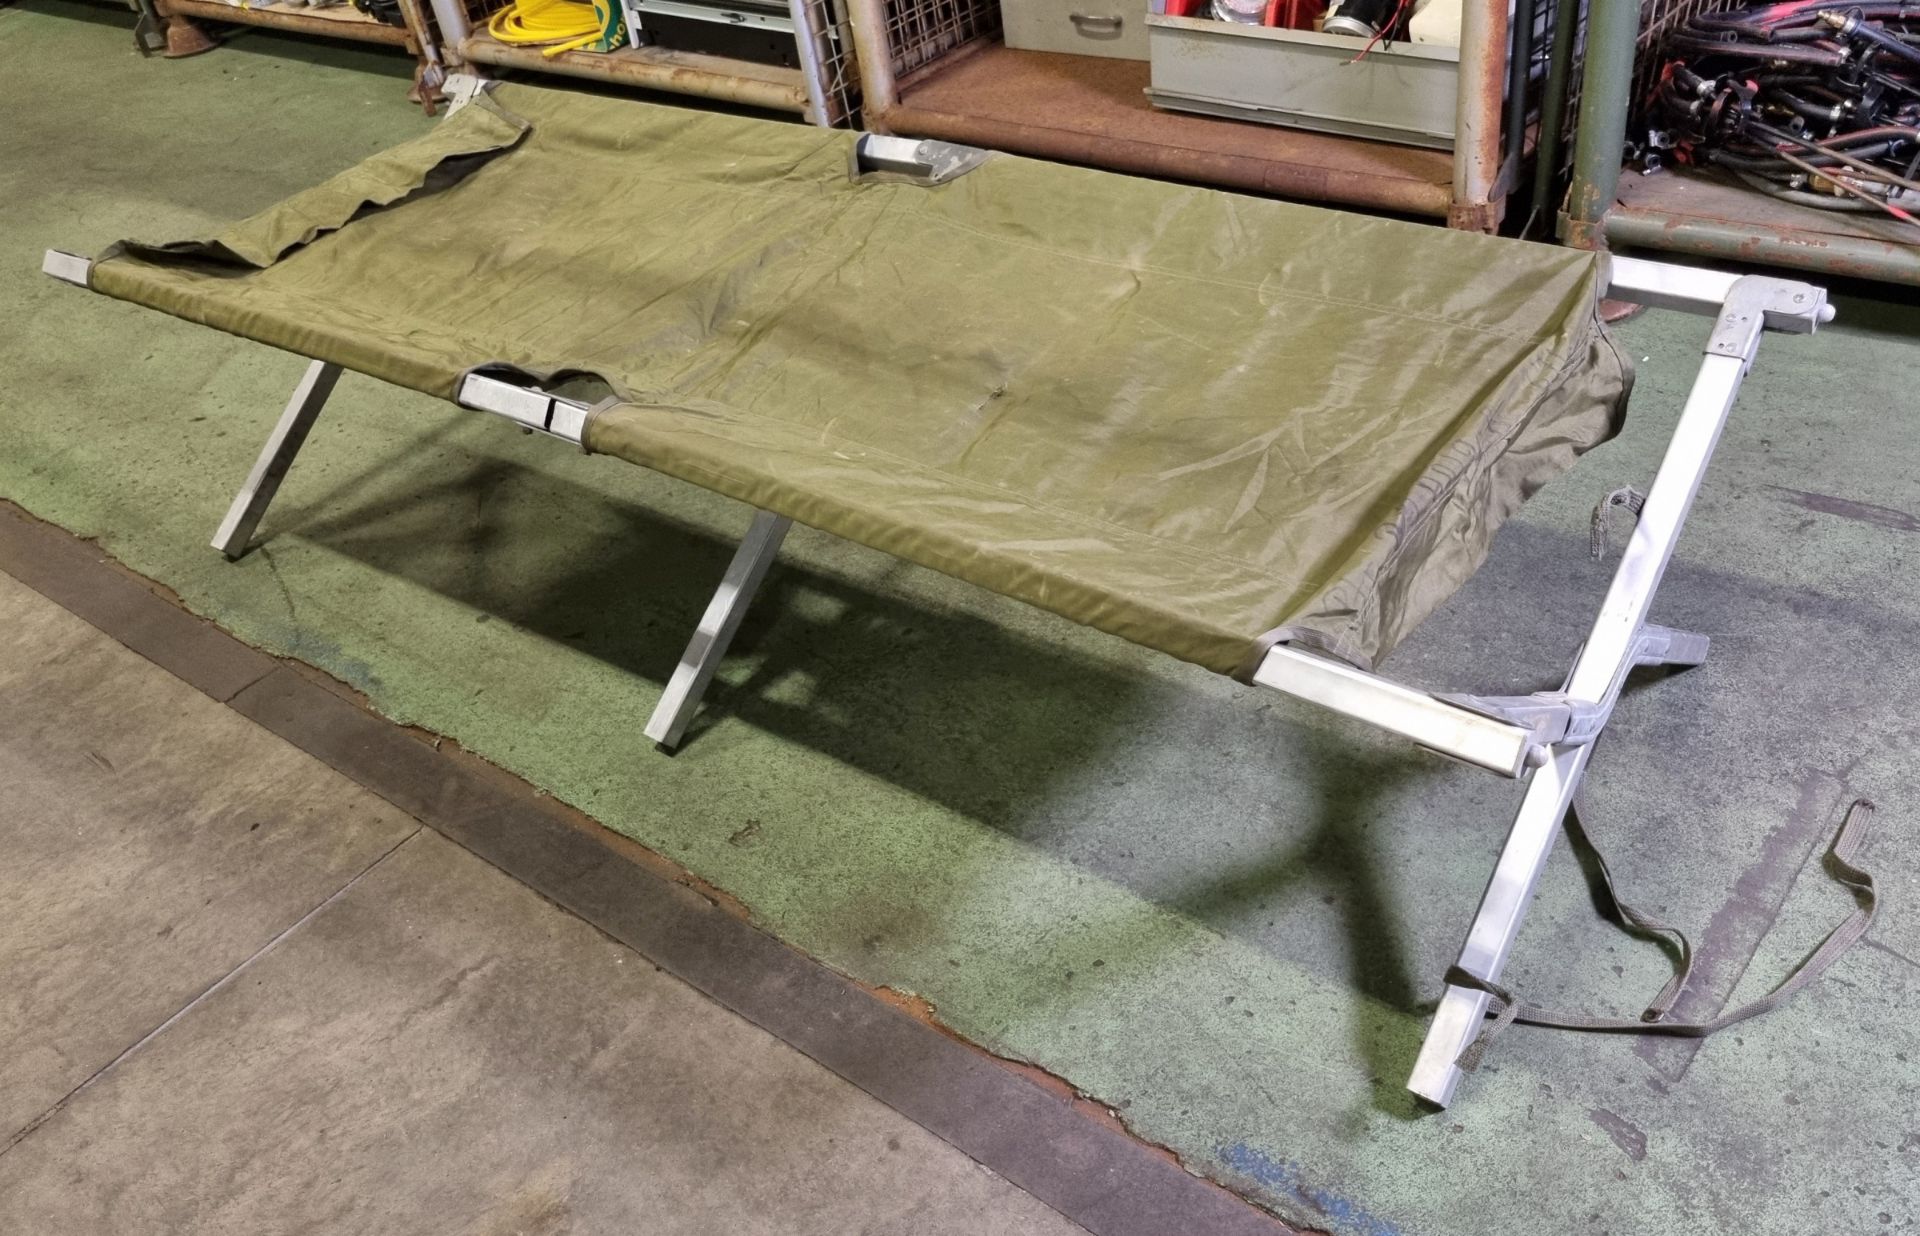 6x folding field cots - L 1900 x W 700 x H 450mm - SPARES OR REPAIRS - Image 4 of 5